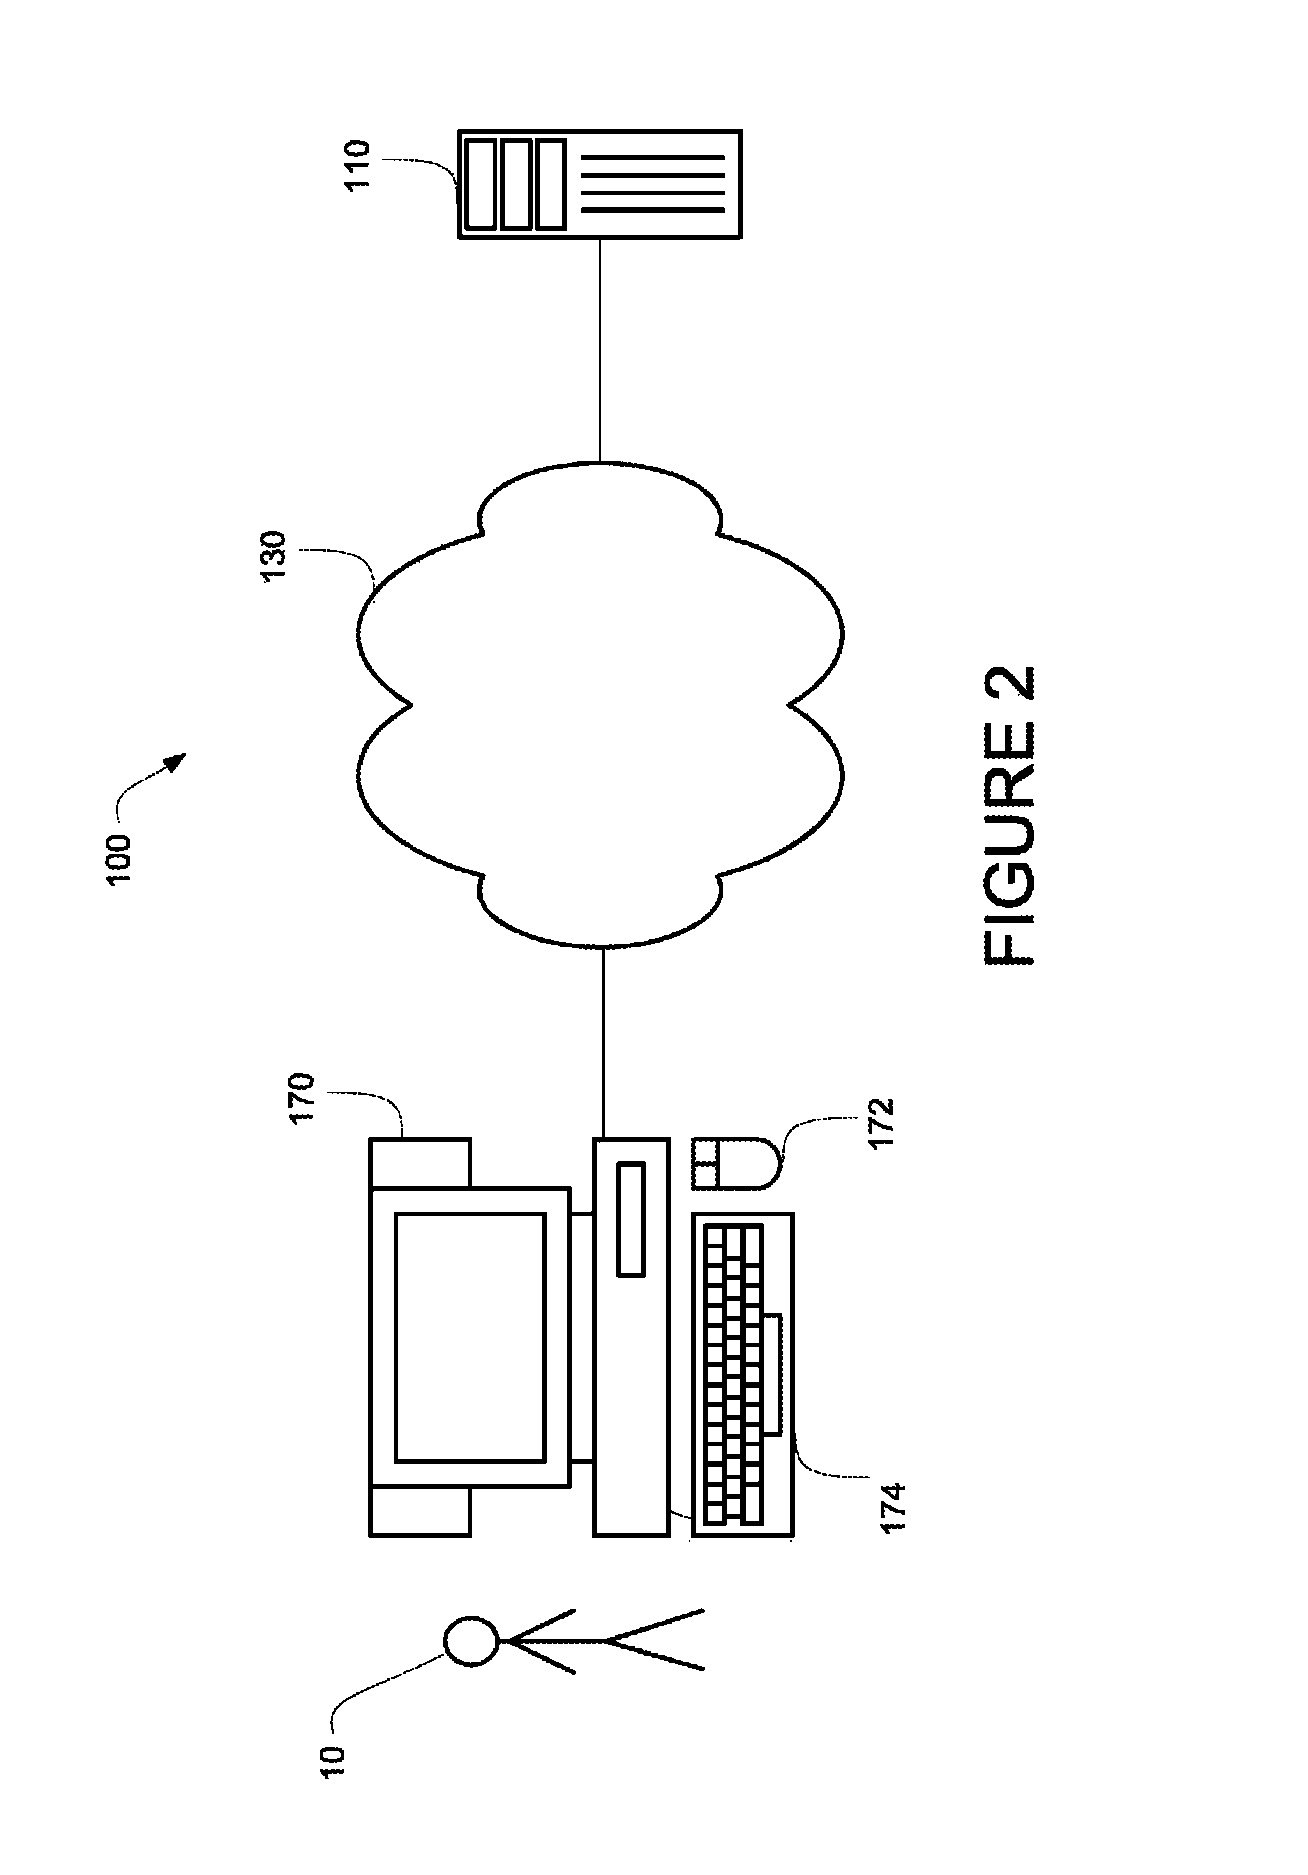 System and method of reducing latency using adaptive retransmission timeouts